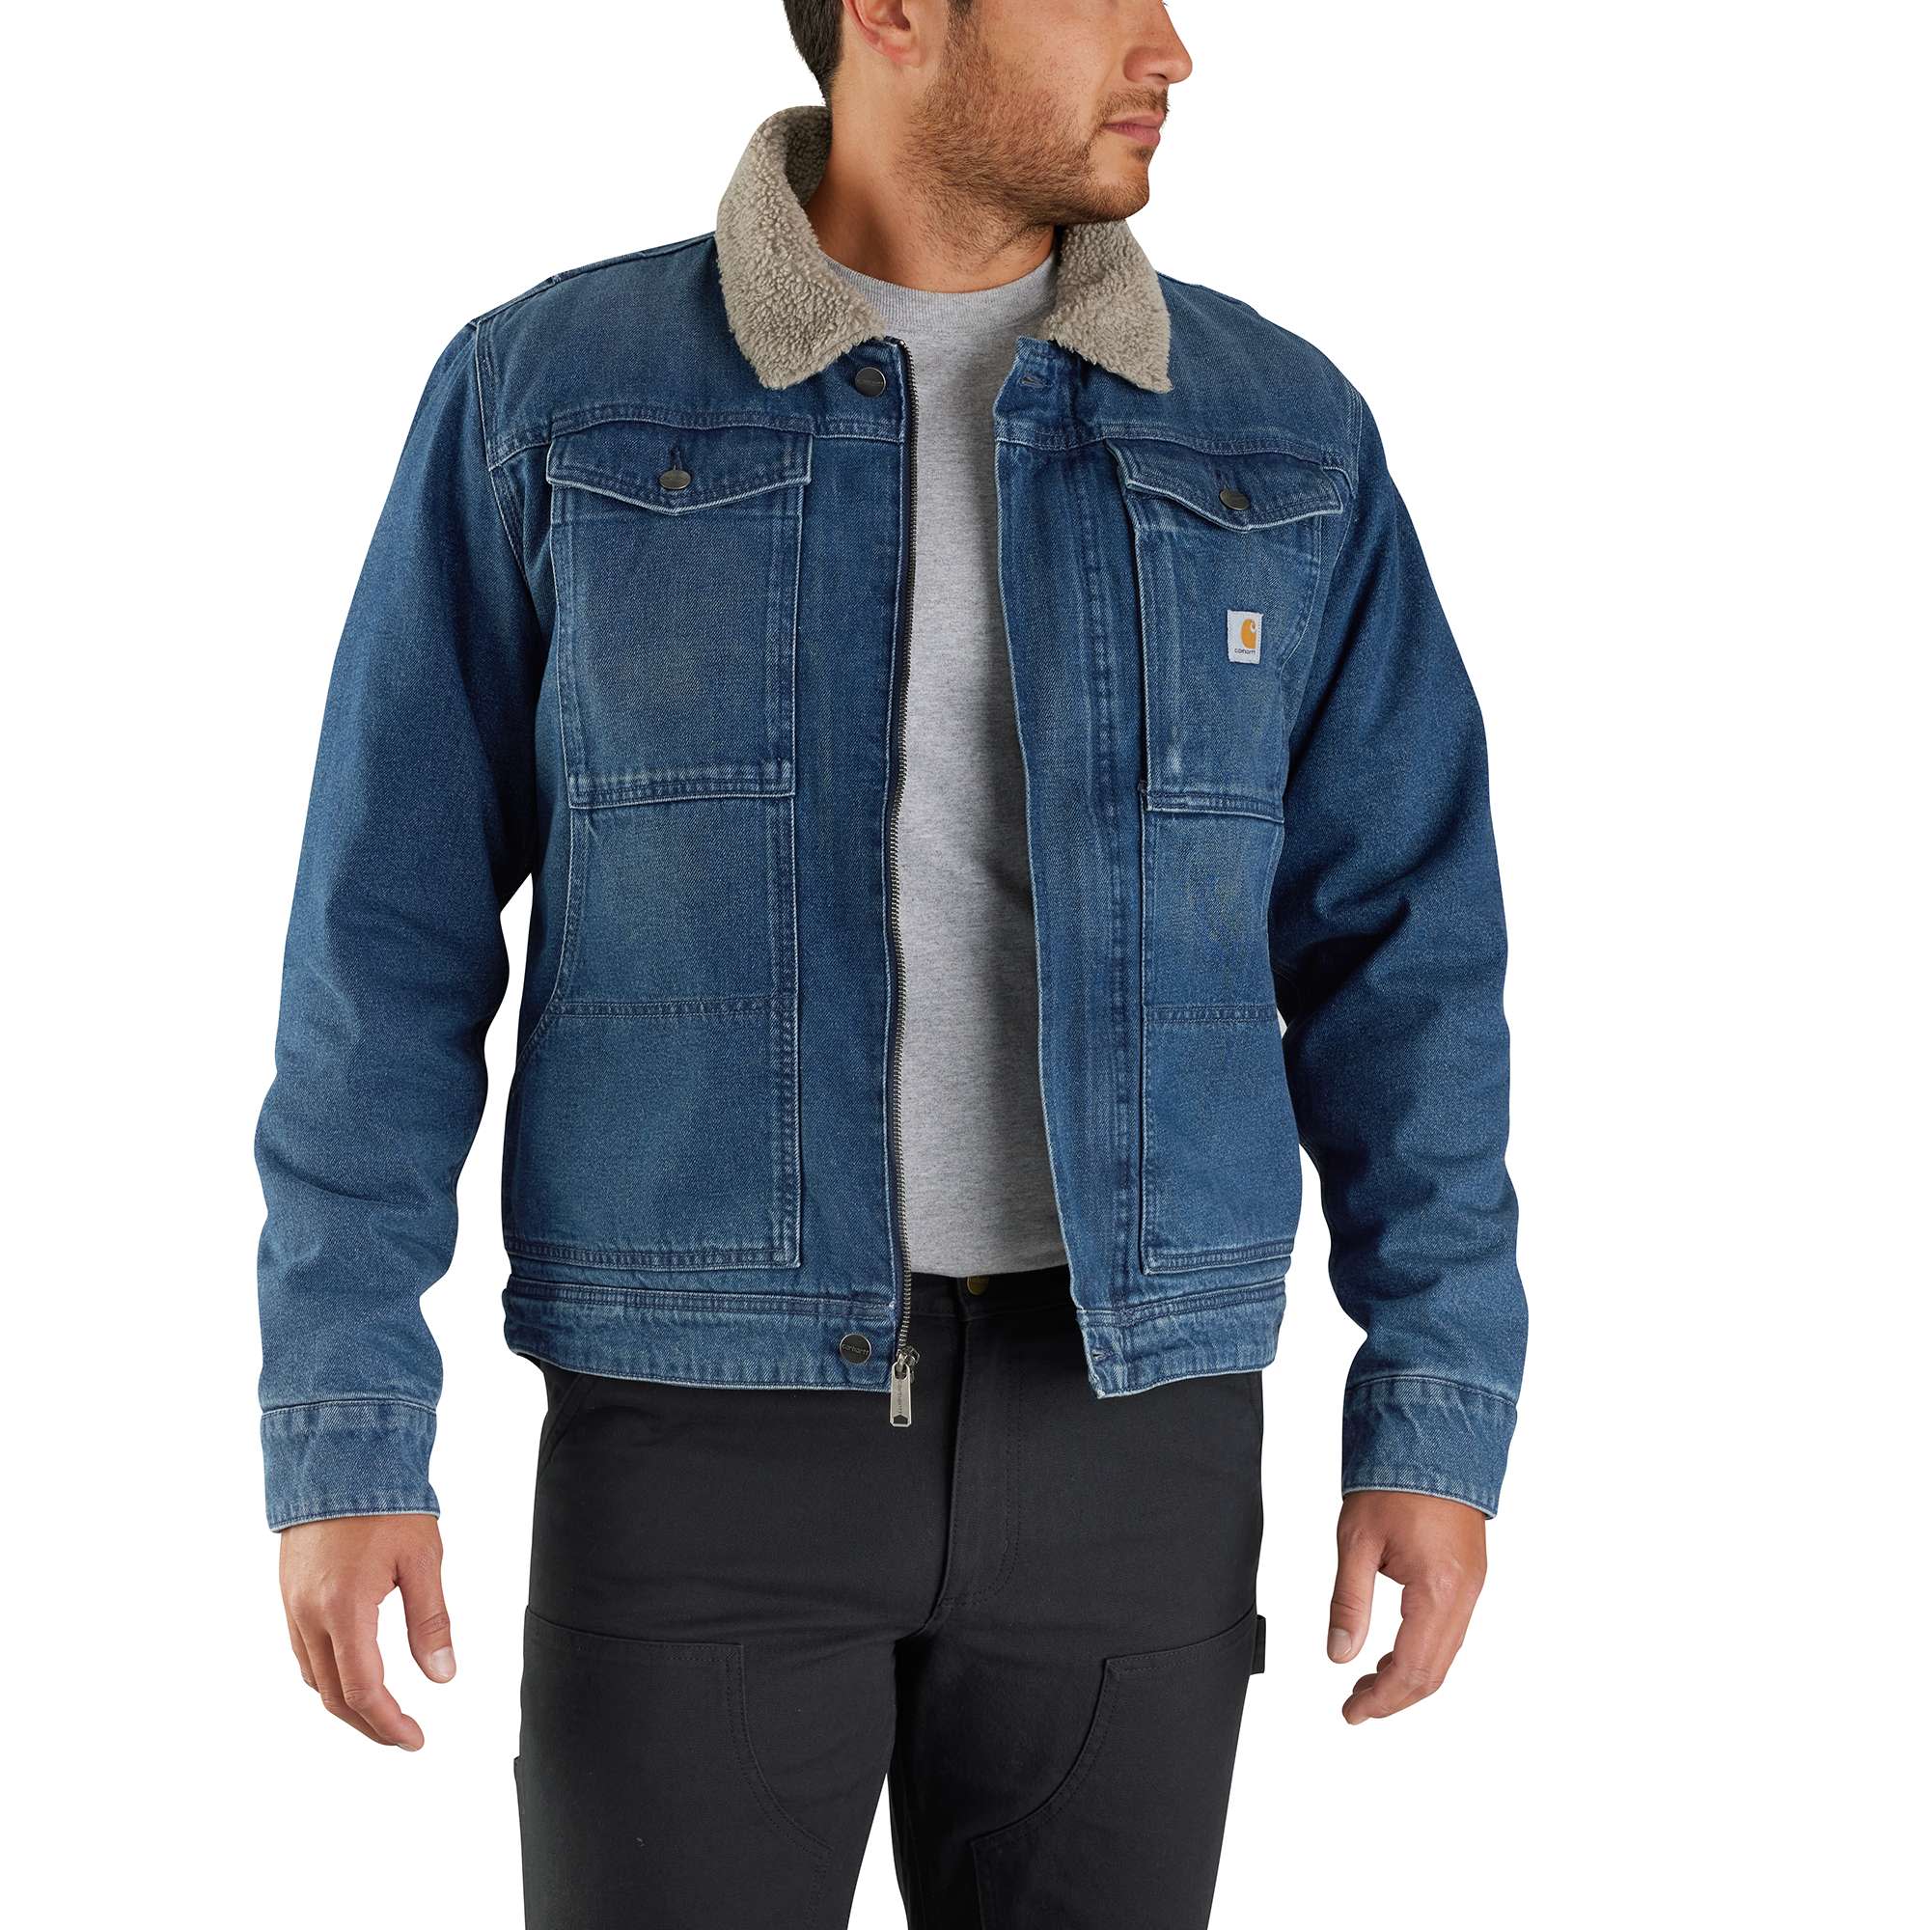 Relaxed Fit Denim Sherpa-Lined Jacket | Carhartt Reworked